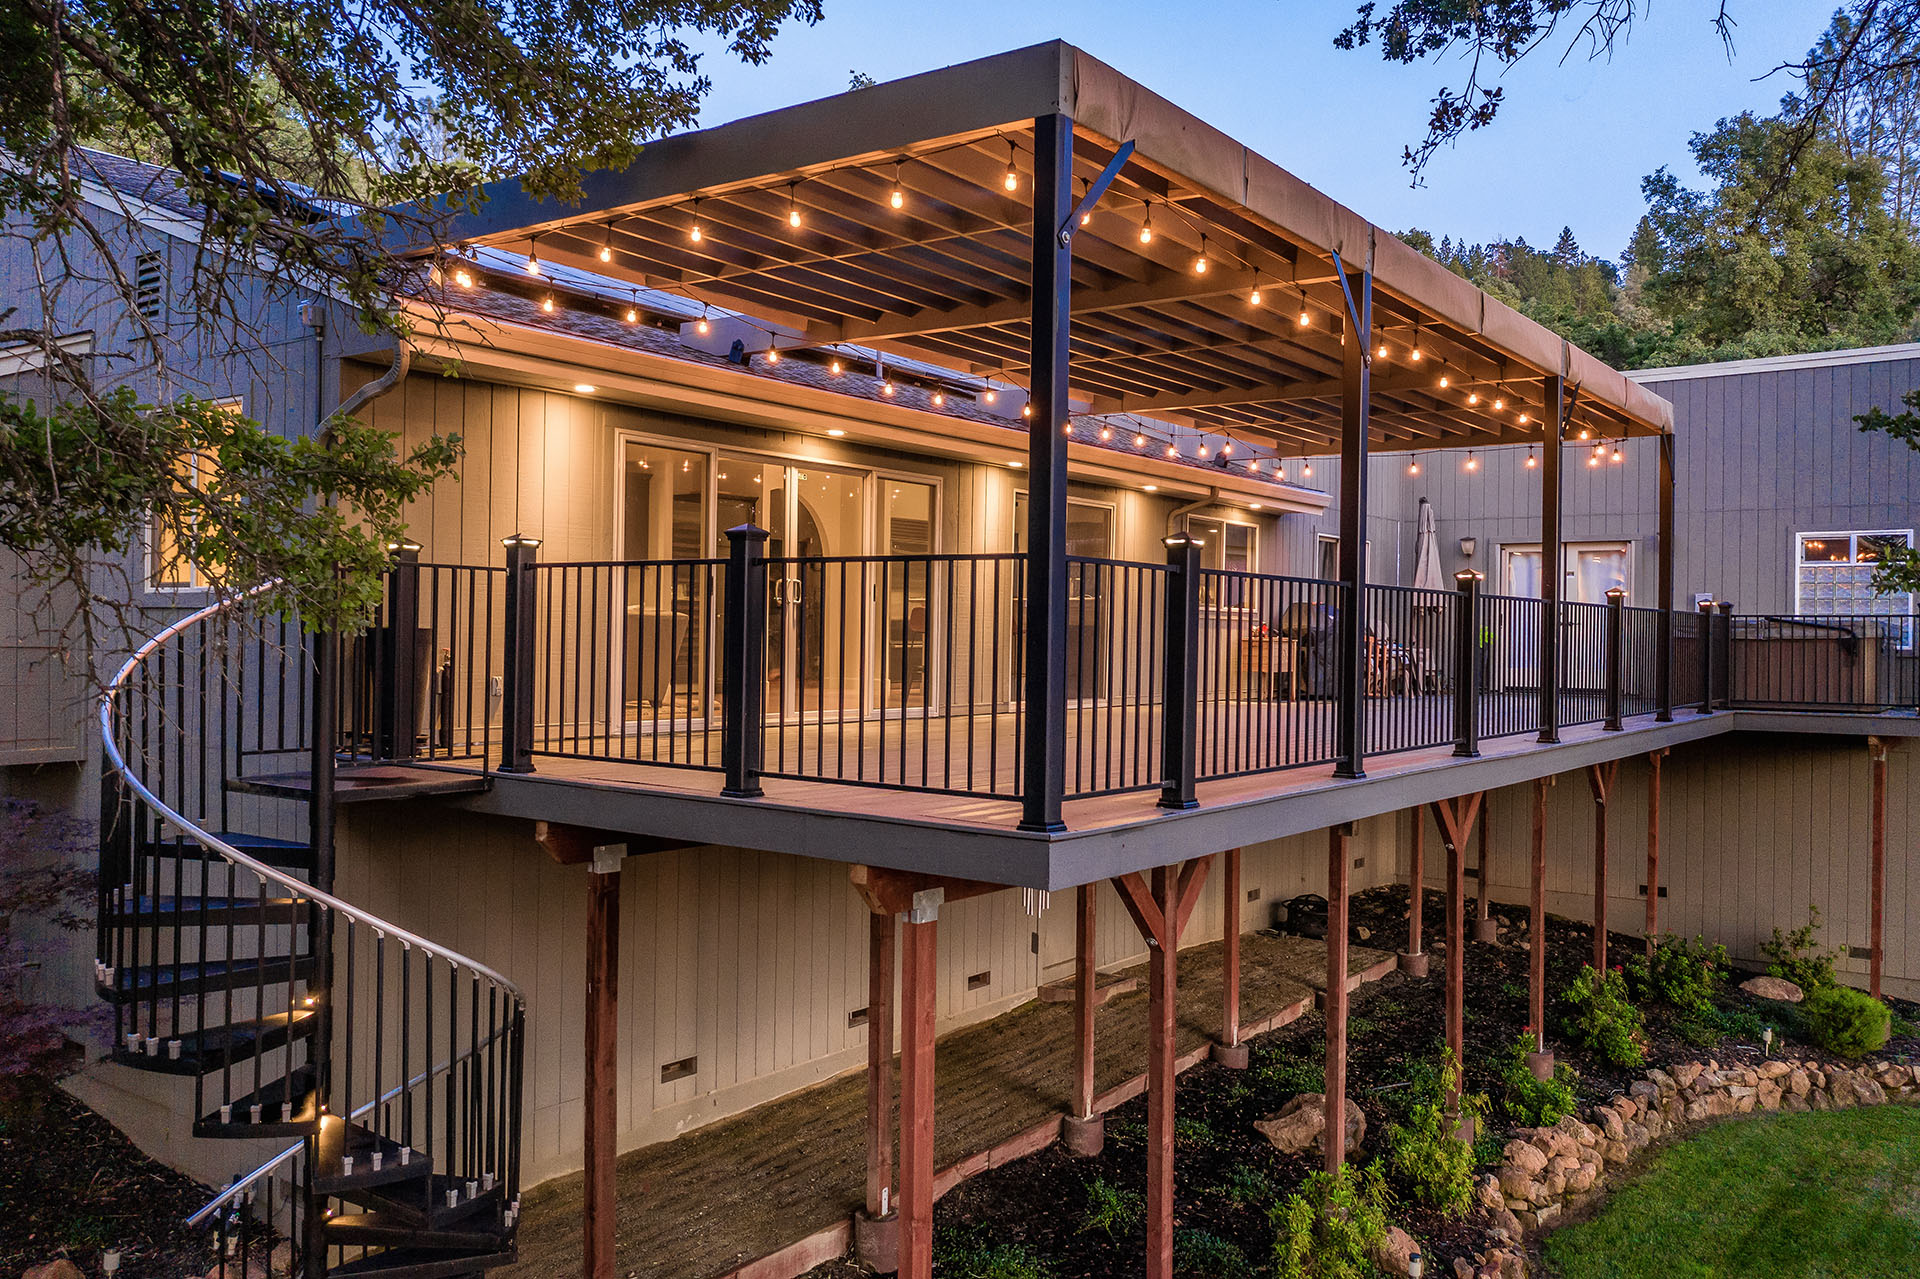 Steel railing with post caps lighting illuminates an elevated deck